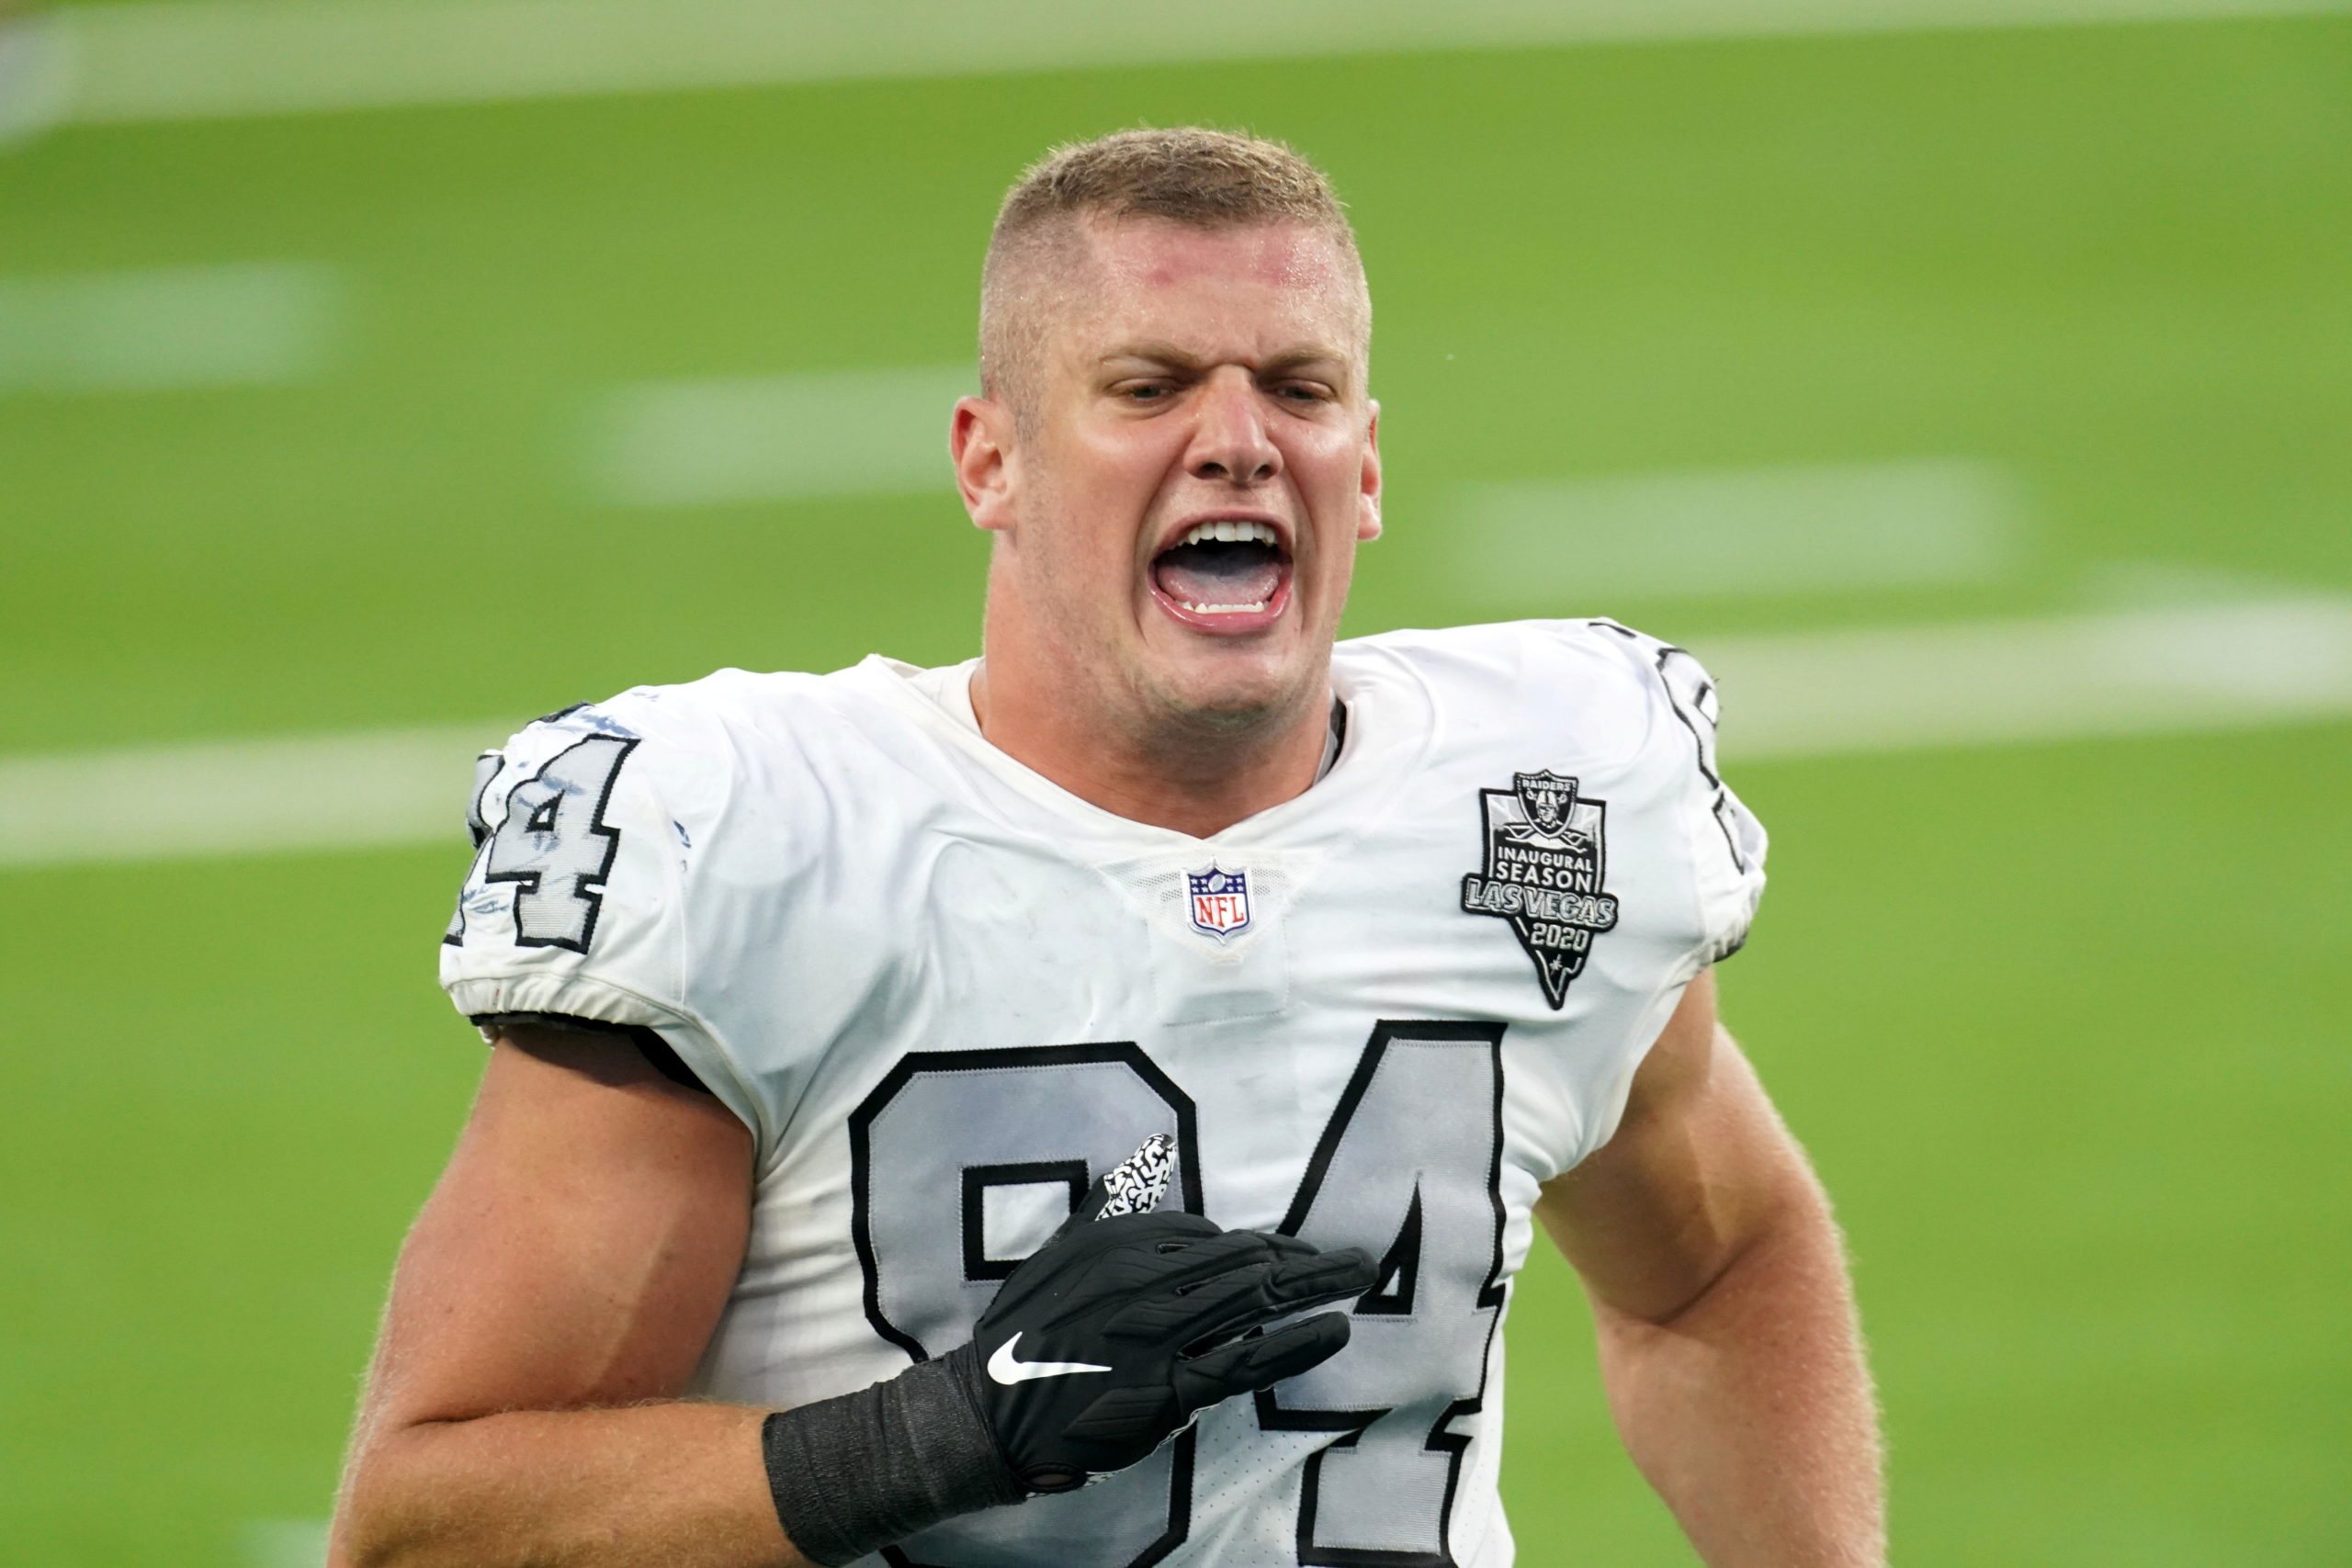 : Las Vegas Raiders defensive end Carl Nassib celebrates at the end of the game against the Los Angeles Chargers